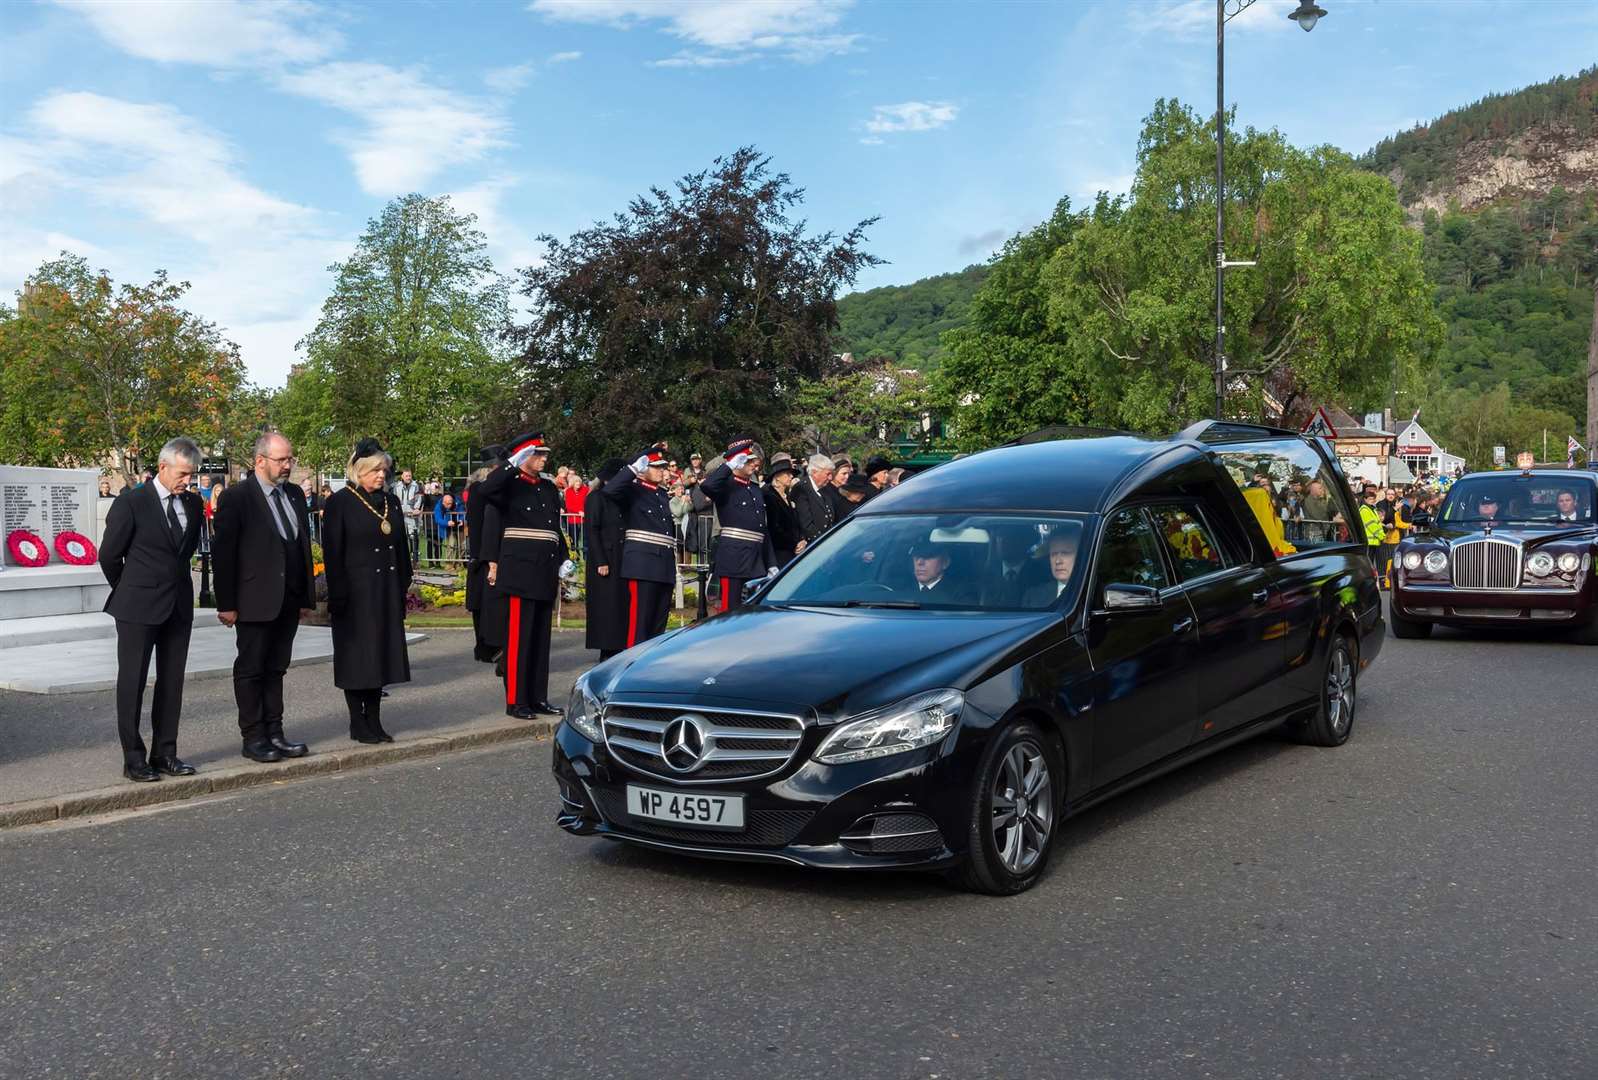 The funeral procession of Her Majesty in Aberdeenshire on Sunday. Picture:Aberdeenshire Council